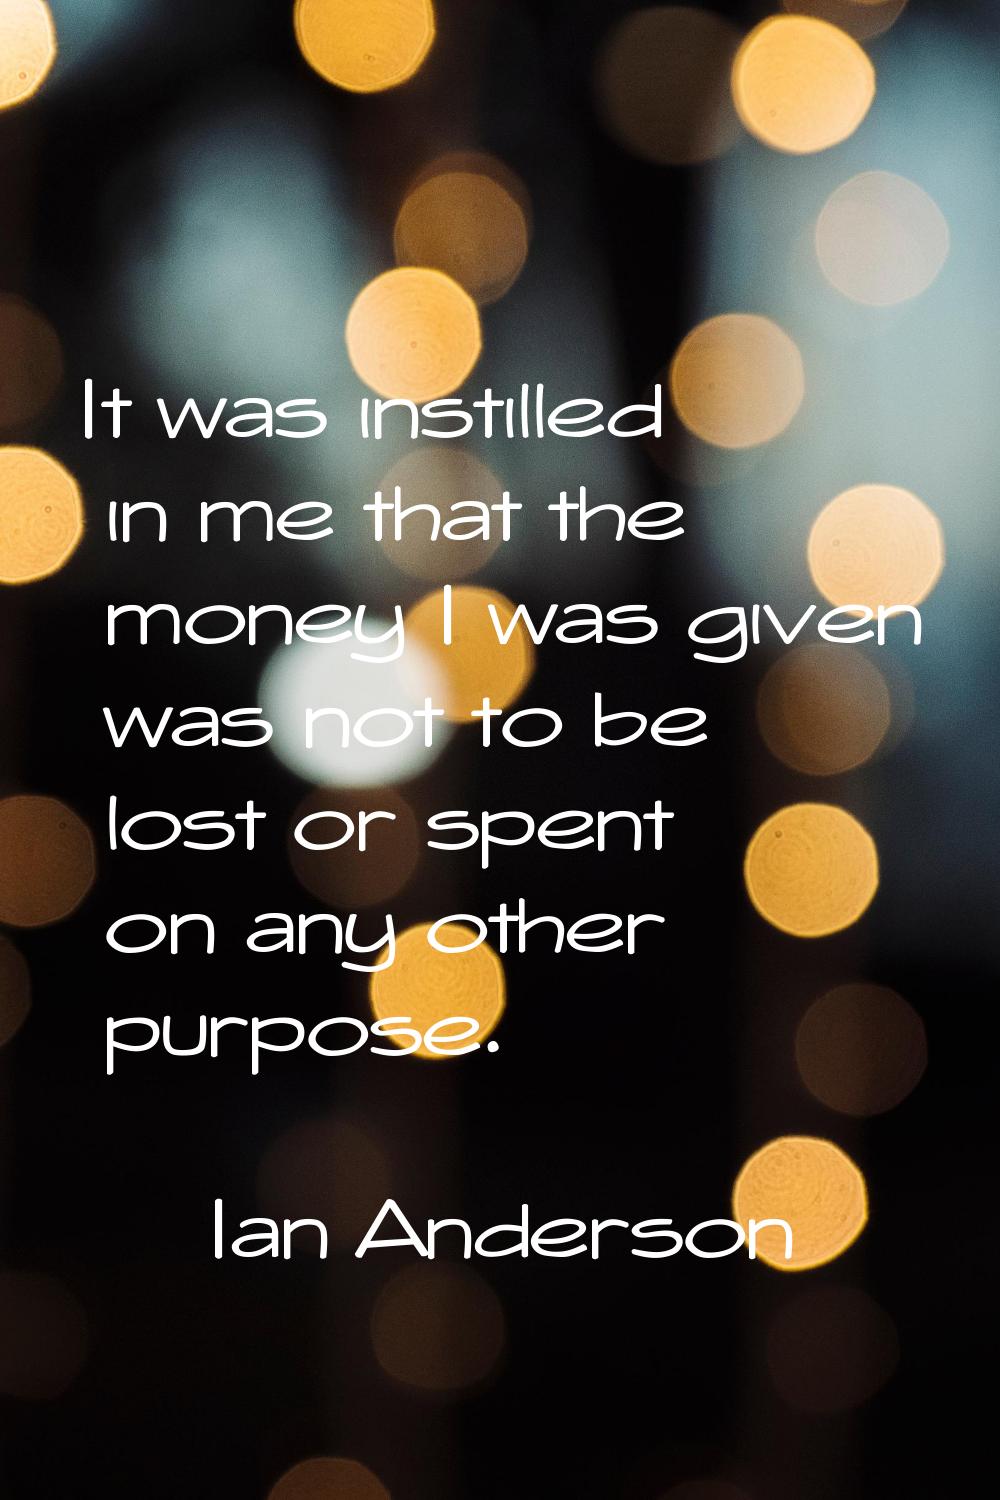 It was instilled in me that the money I was given was not to be lost or spent on any other purpose.